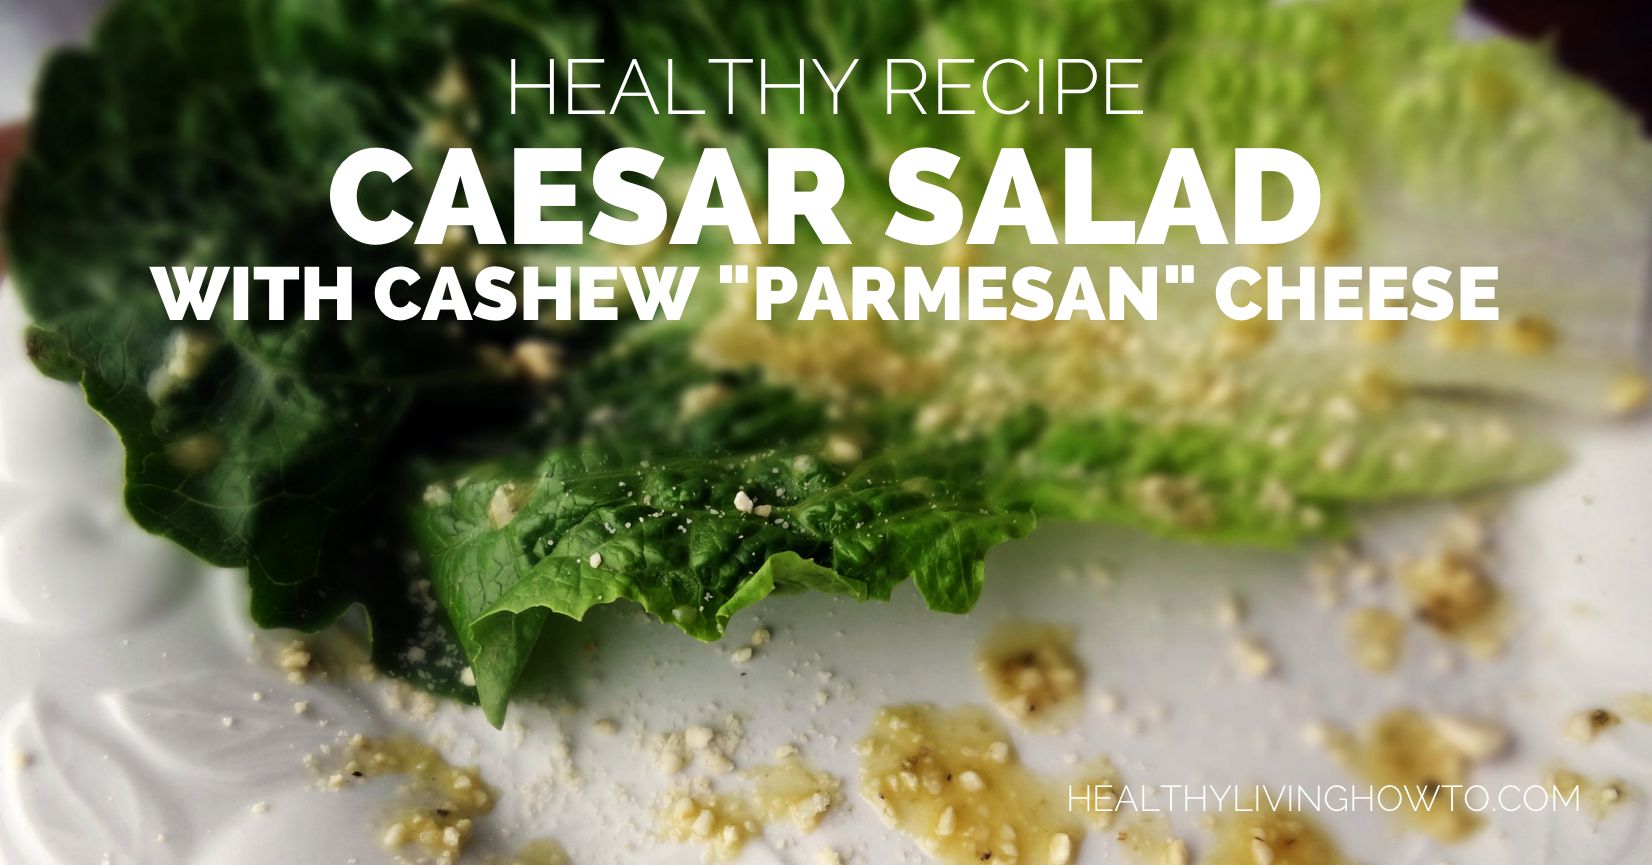 Healthy Recipe: Caesar Salad with Cashew Paresan Cheese | healthylivinghowto.com